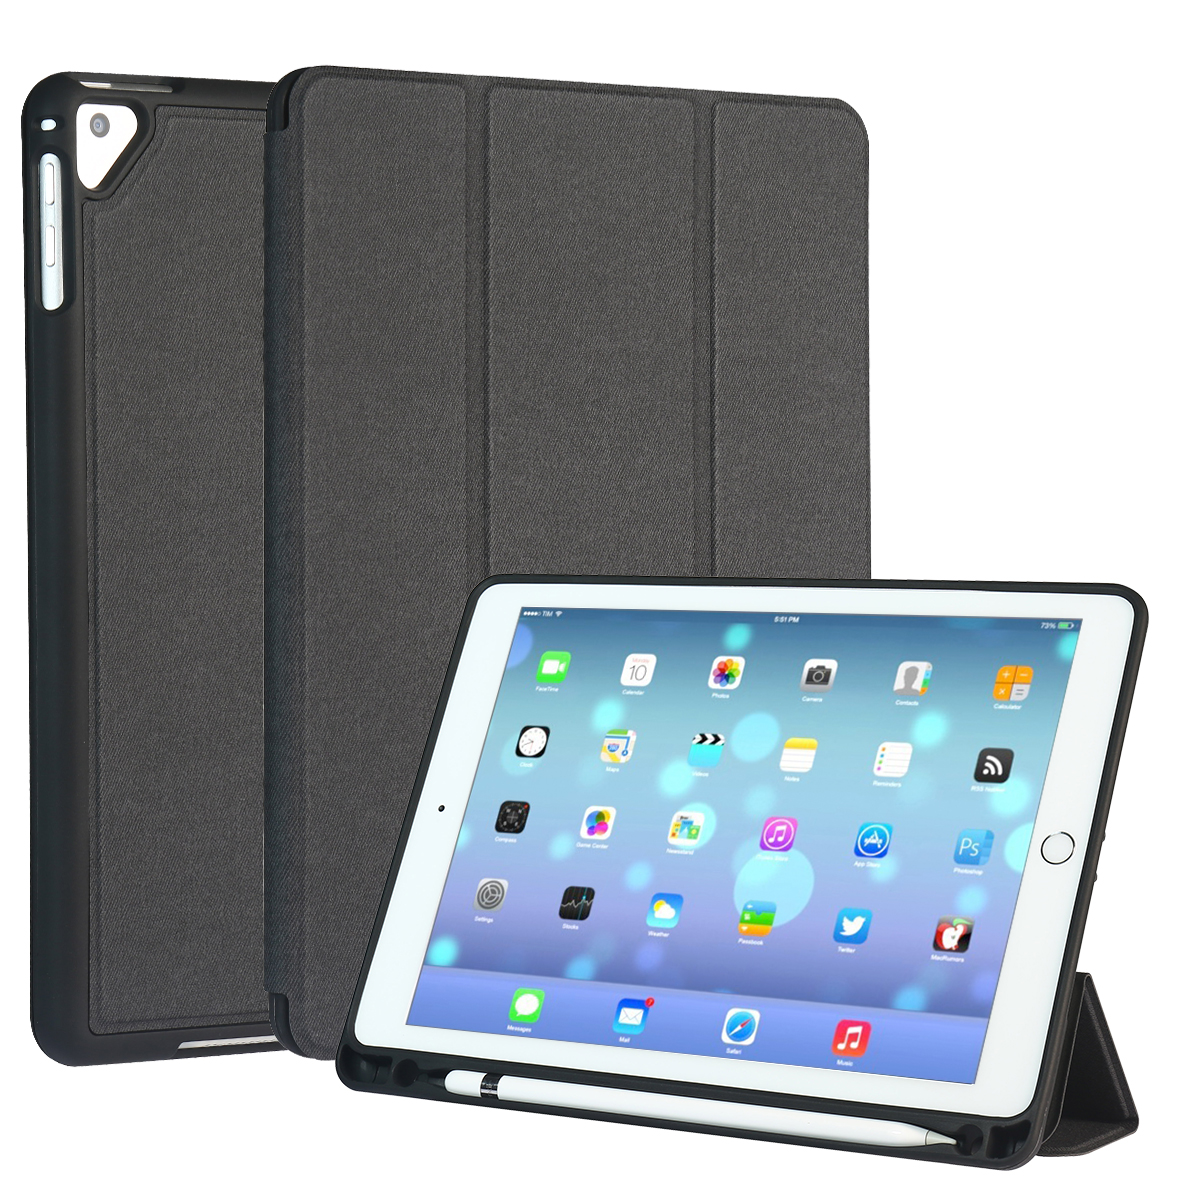 Trifold Stand, Soft TPU Back Cover, Lightweight Shockproof Case for iPad 2022